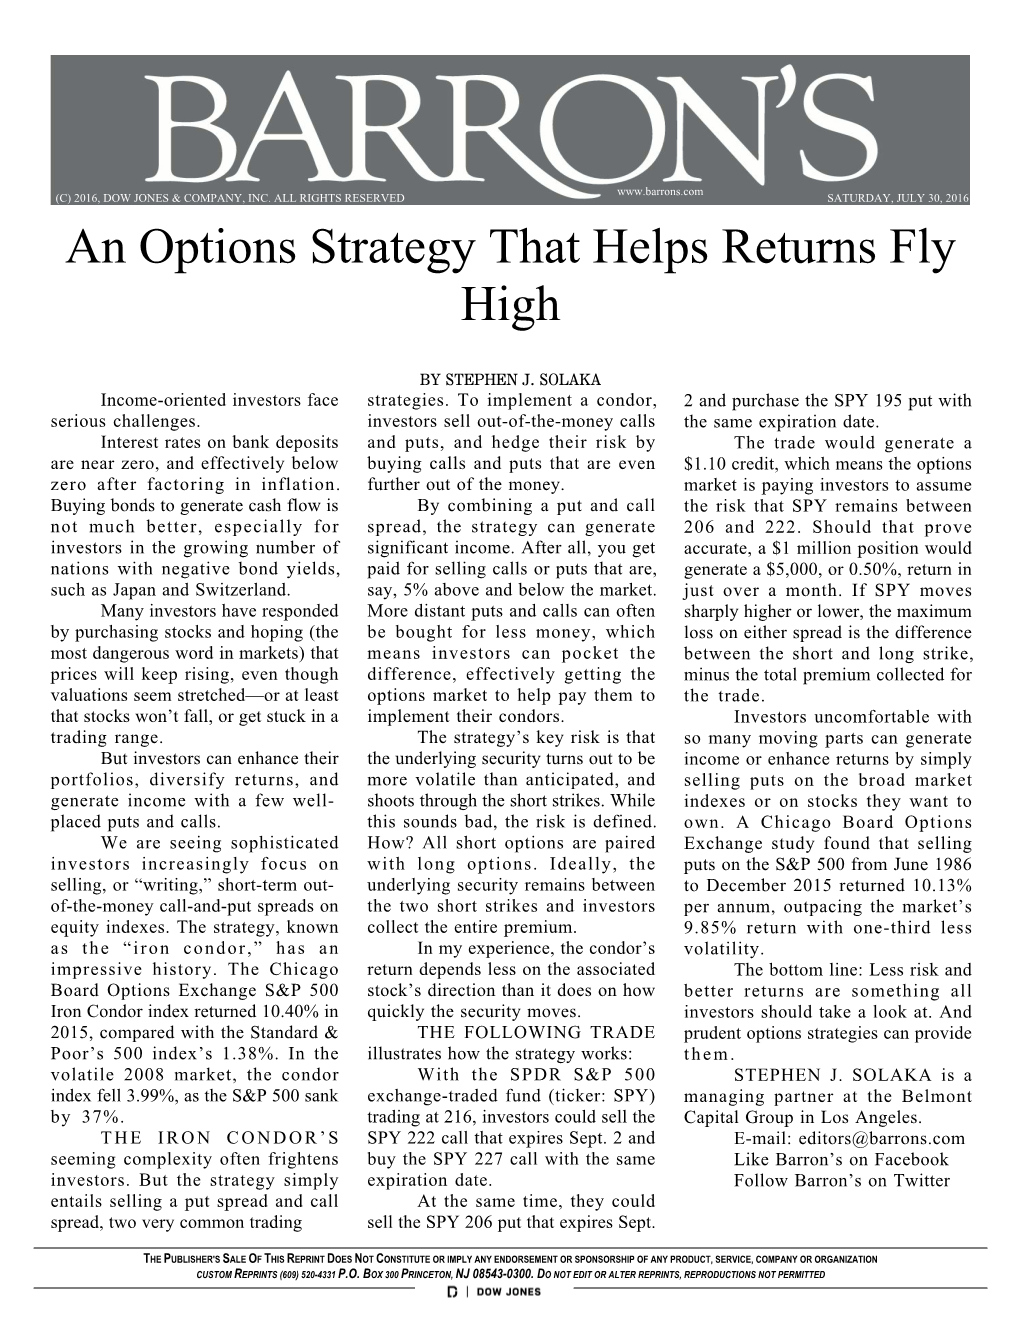 An Options Strategy That Helps Returns Fly High